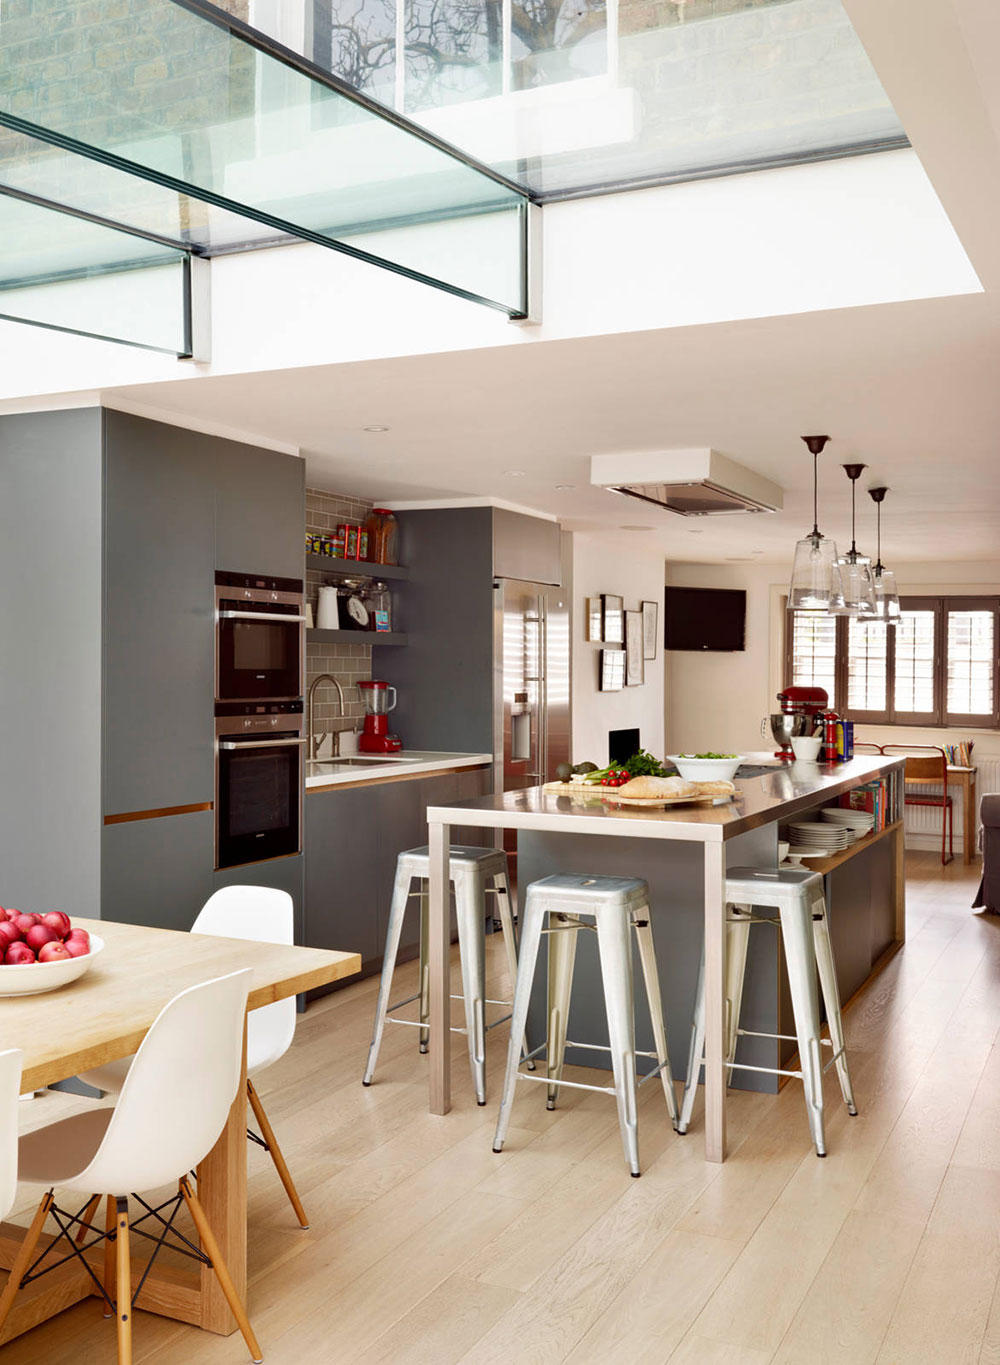 The-Pros-And-Cons-Of-Open-Versus-Closed-Kitchens2 The Pros And Cons Of Open And Closed Kitchens